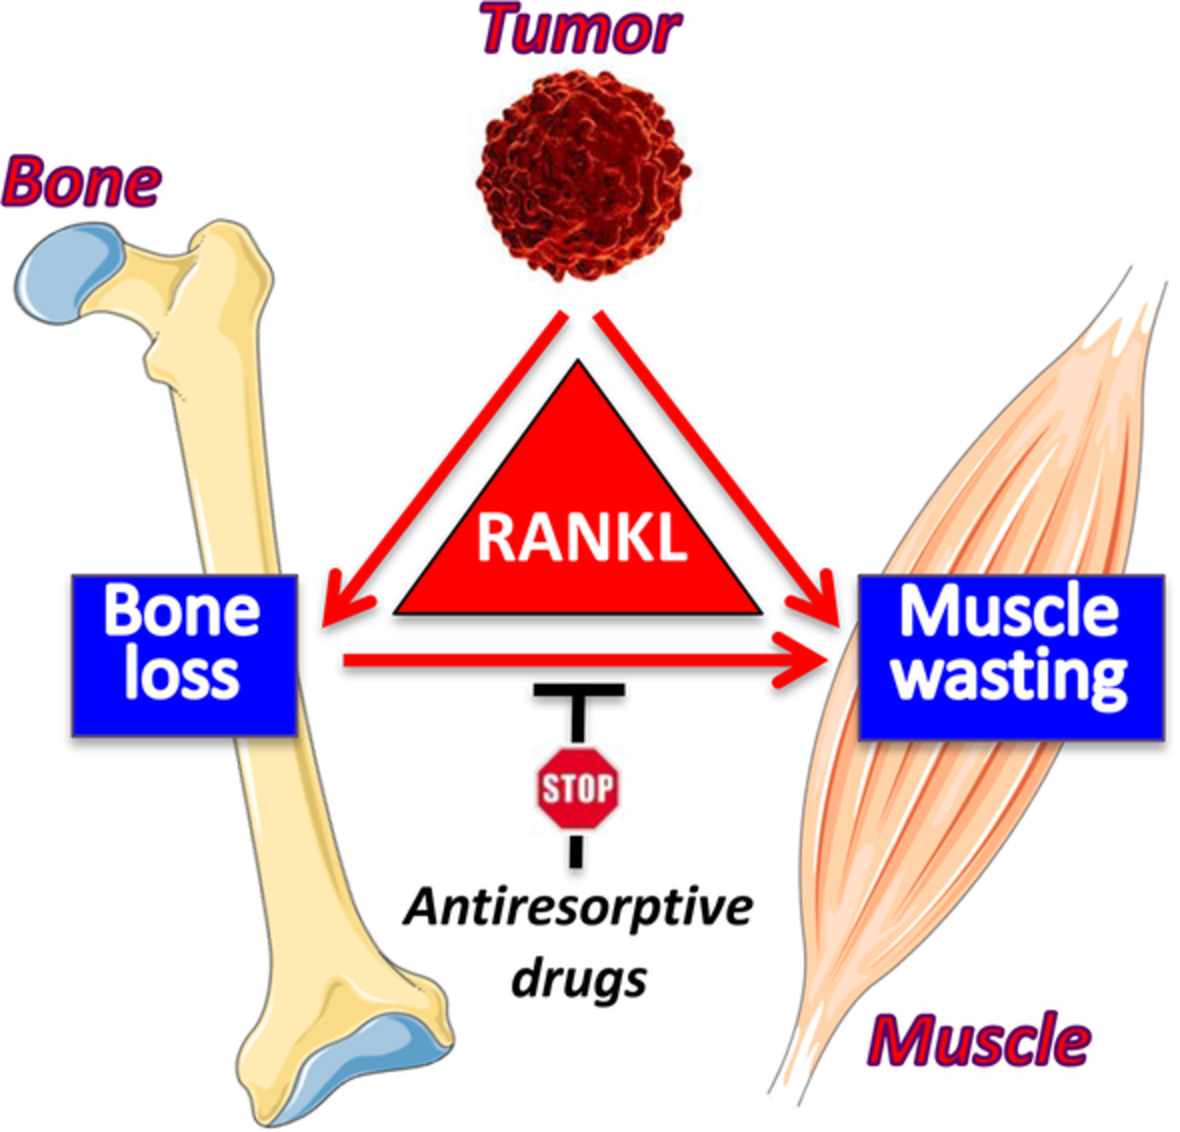 RANKL Blockade Reduces Cachexia and Bone Loss Induced by Non‐Metastatic Ovarian Cancer in Mice